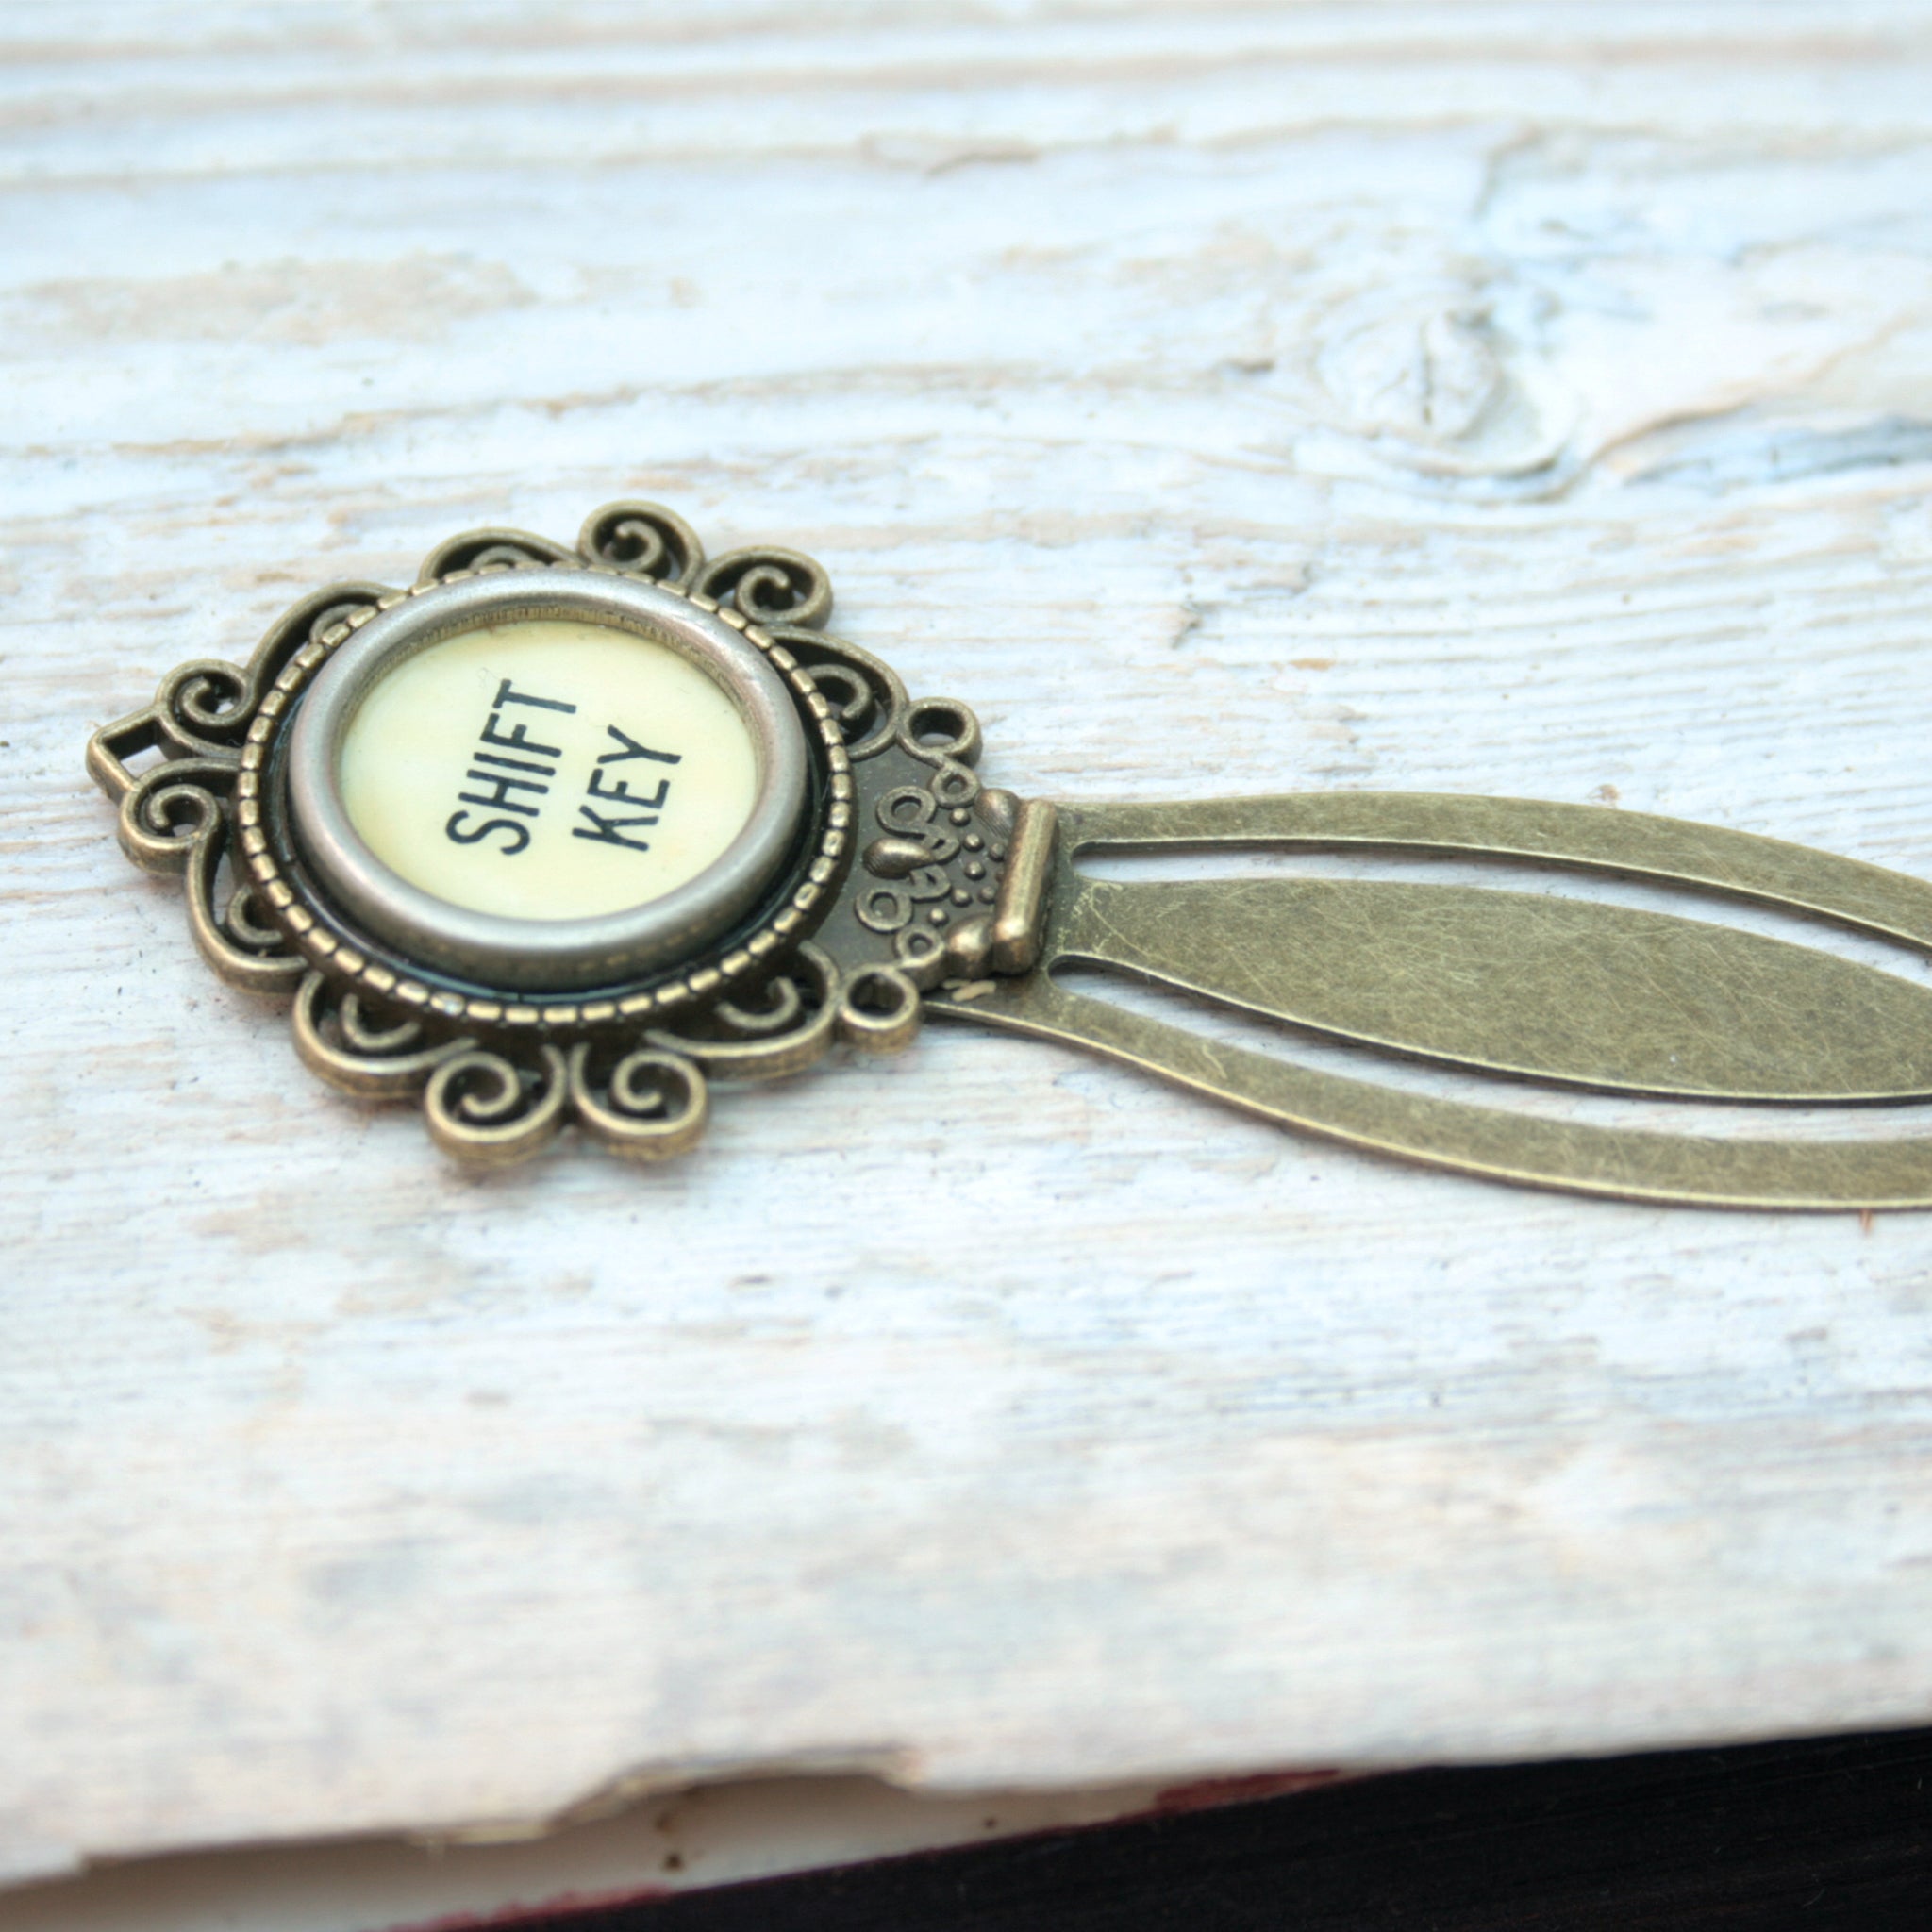 Shift Key metal bookmark for books - made of authentic vintage typewriter key in ivory color